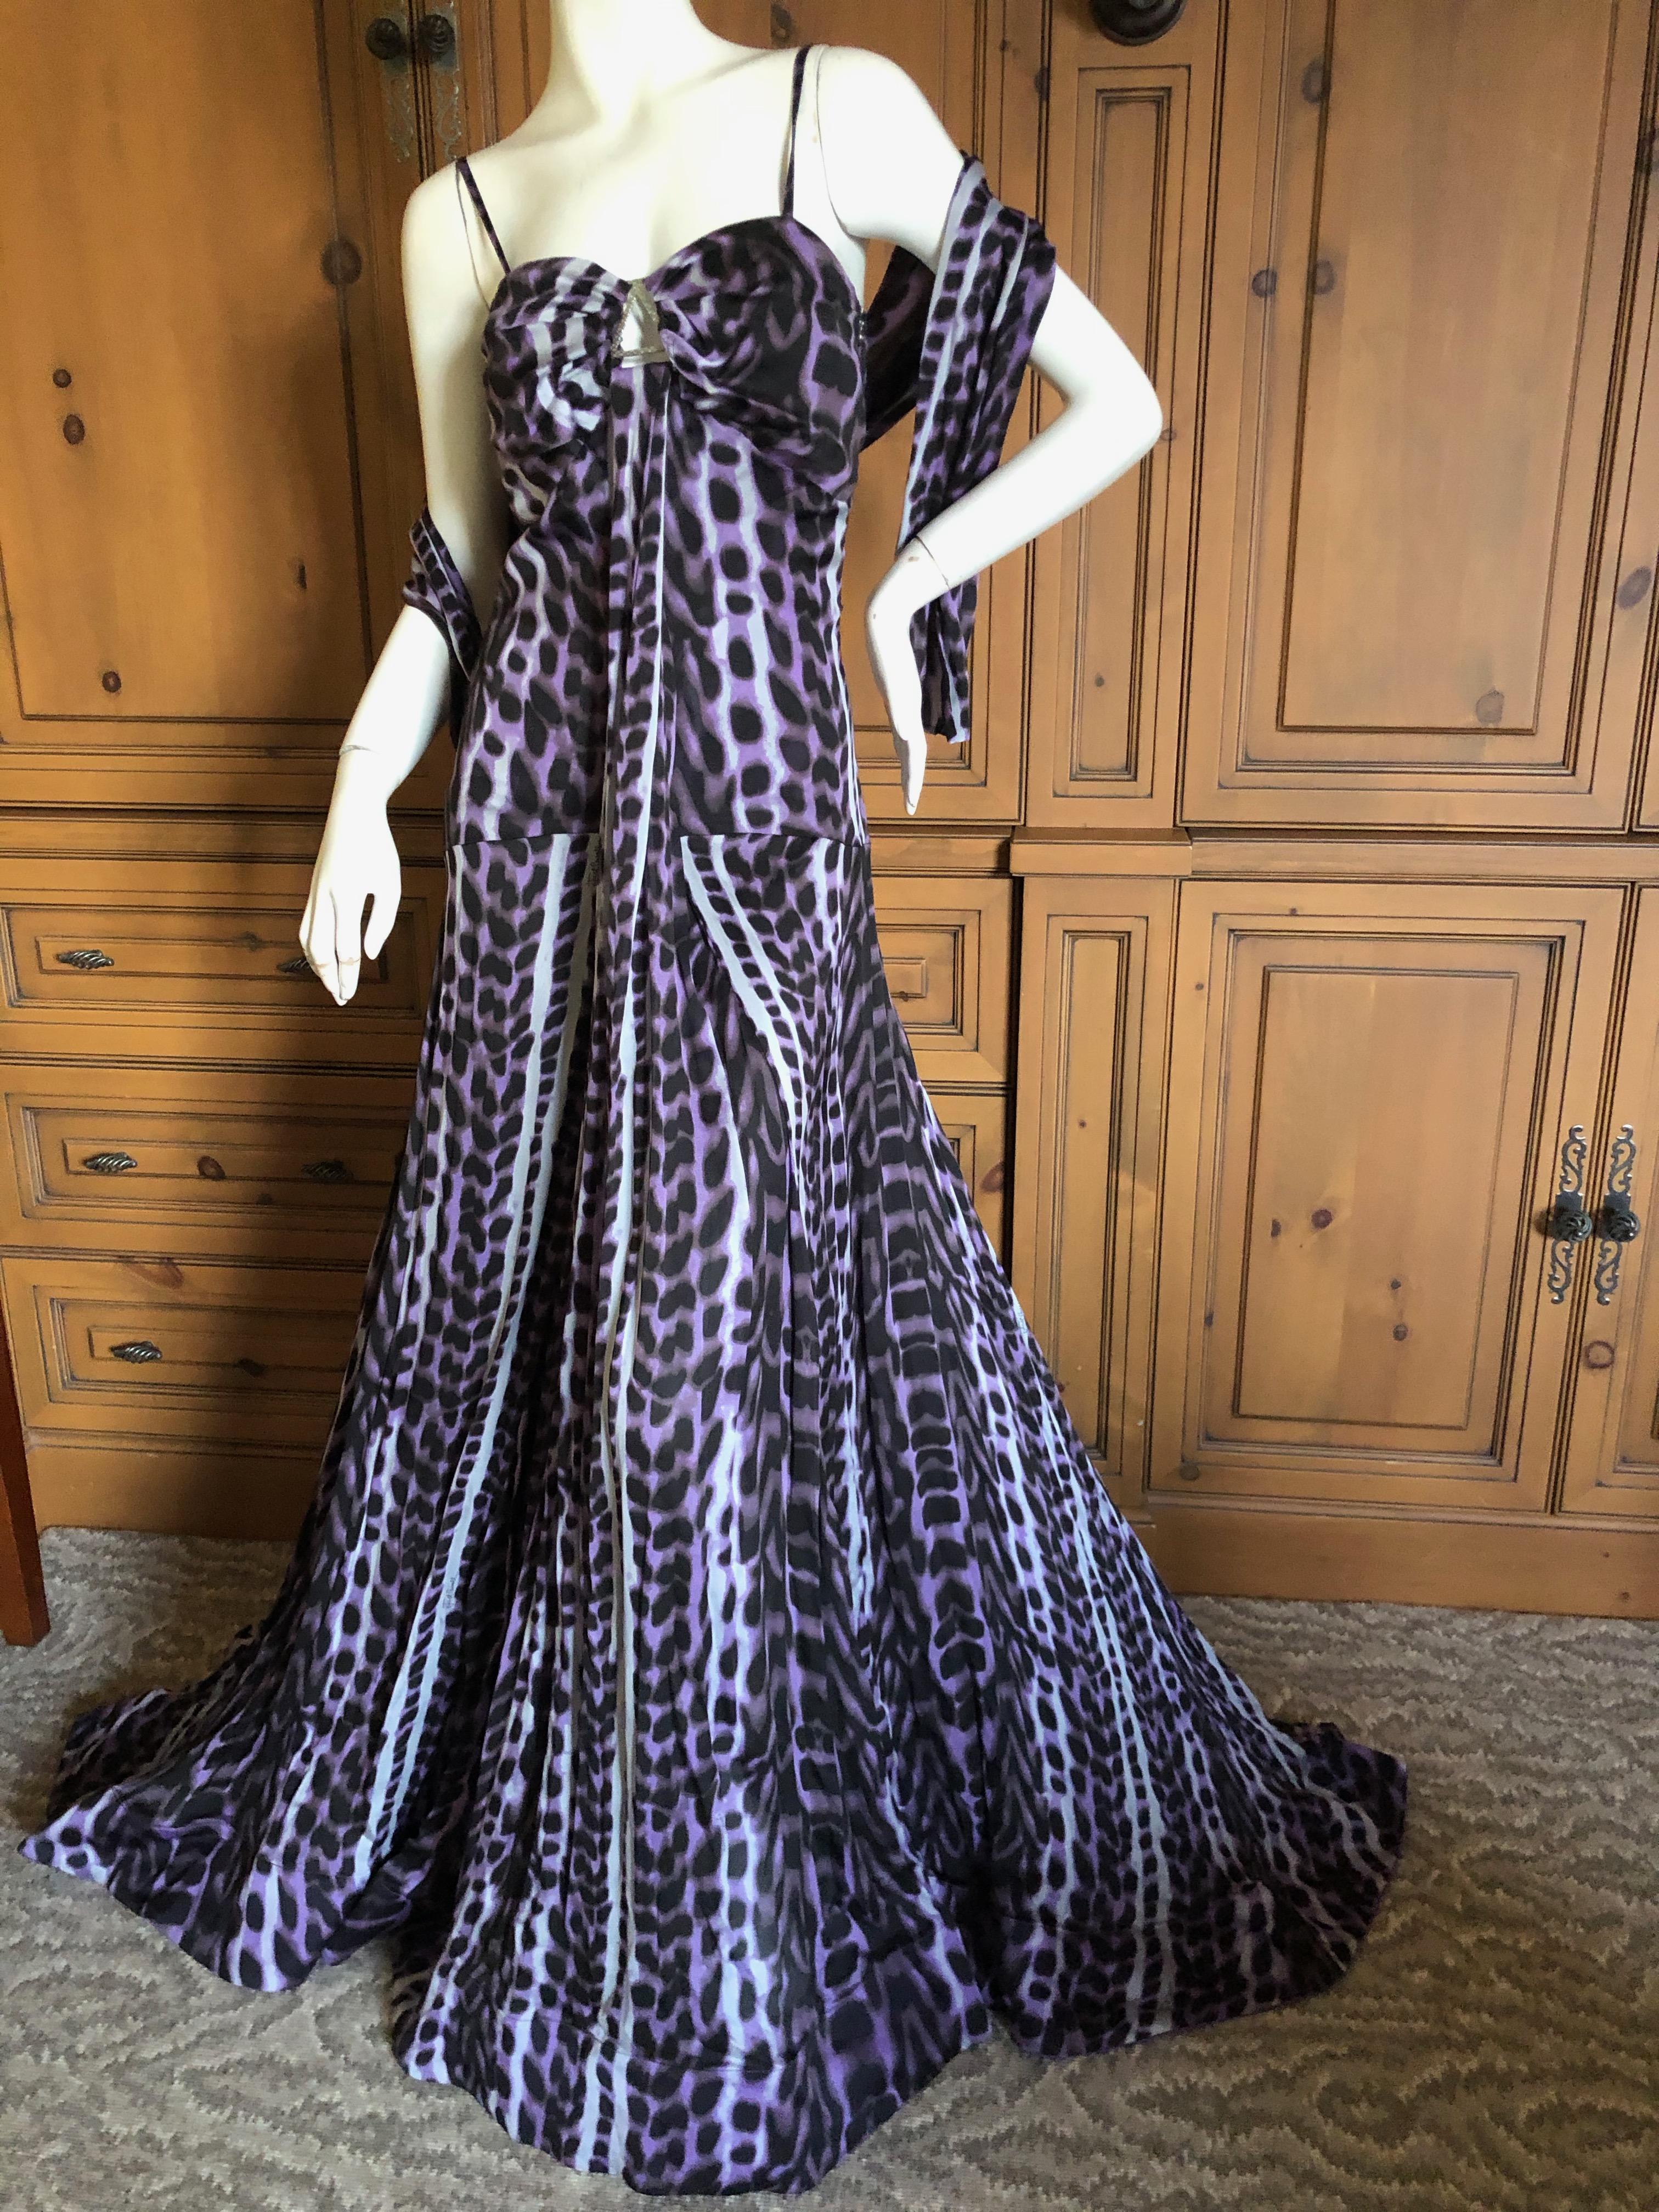  Roberto Cavalli Just Cavalli Leopard Print Silk Evening Gown Long Weighted Hem  In Excellent Condition For Sale In Cloverdale, CA